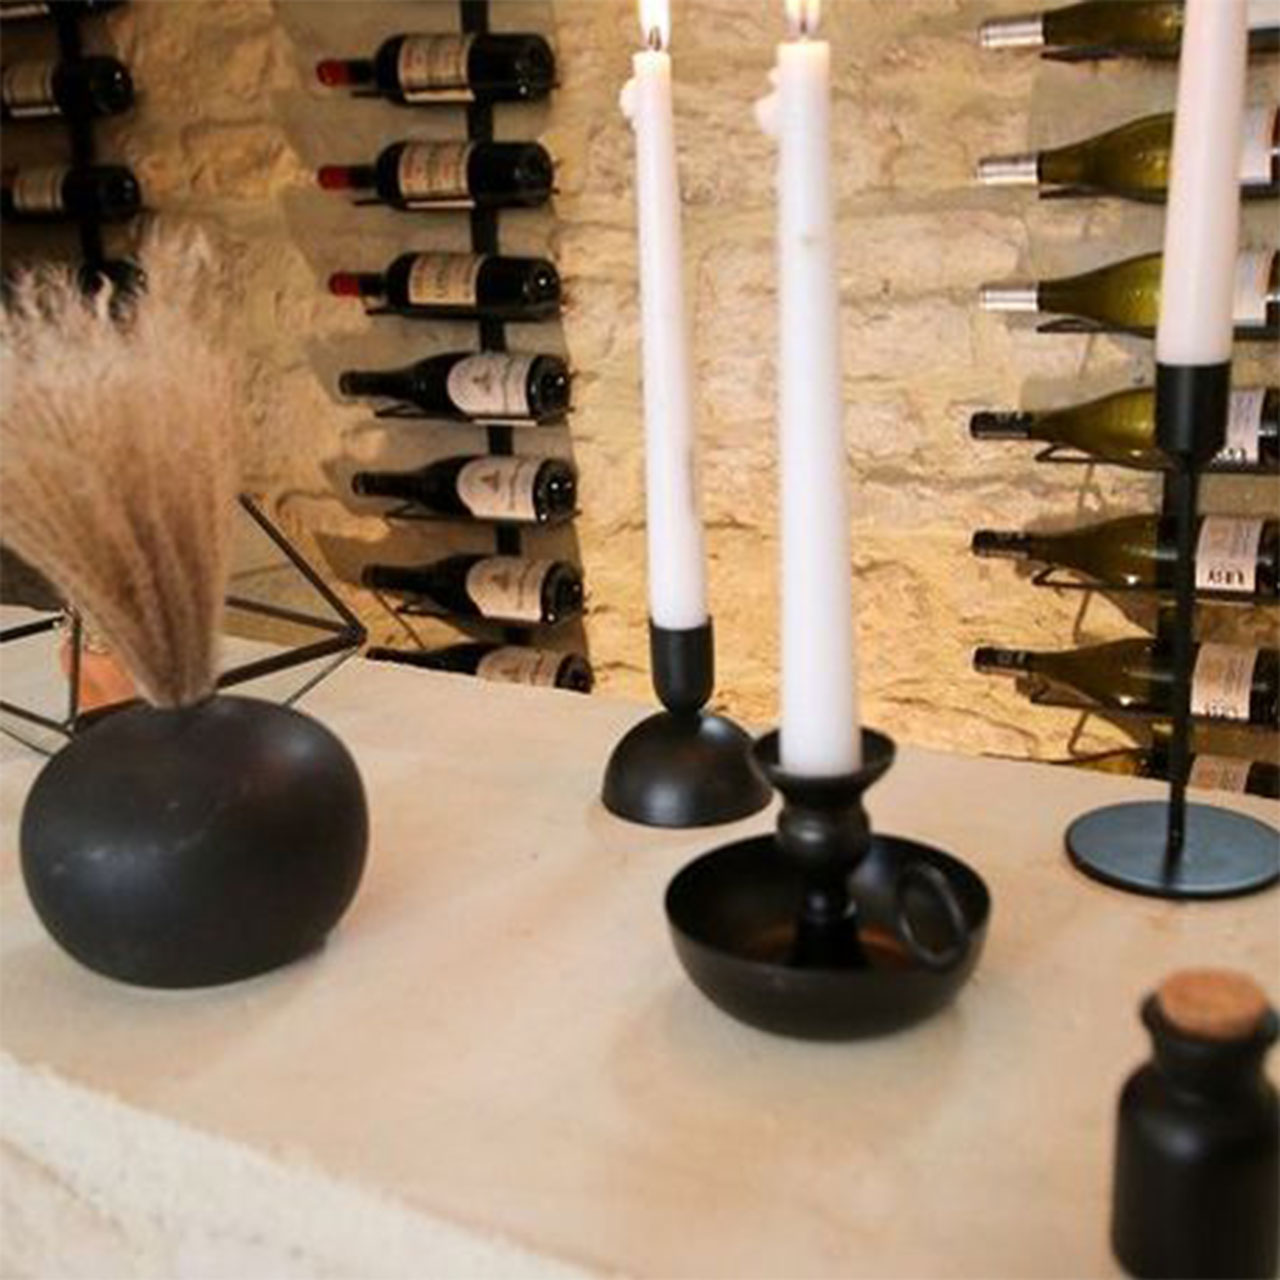 Candle Holder - Black Dome